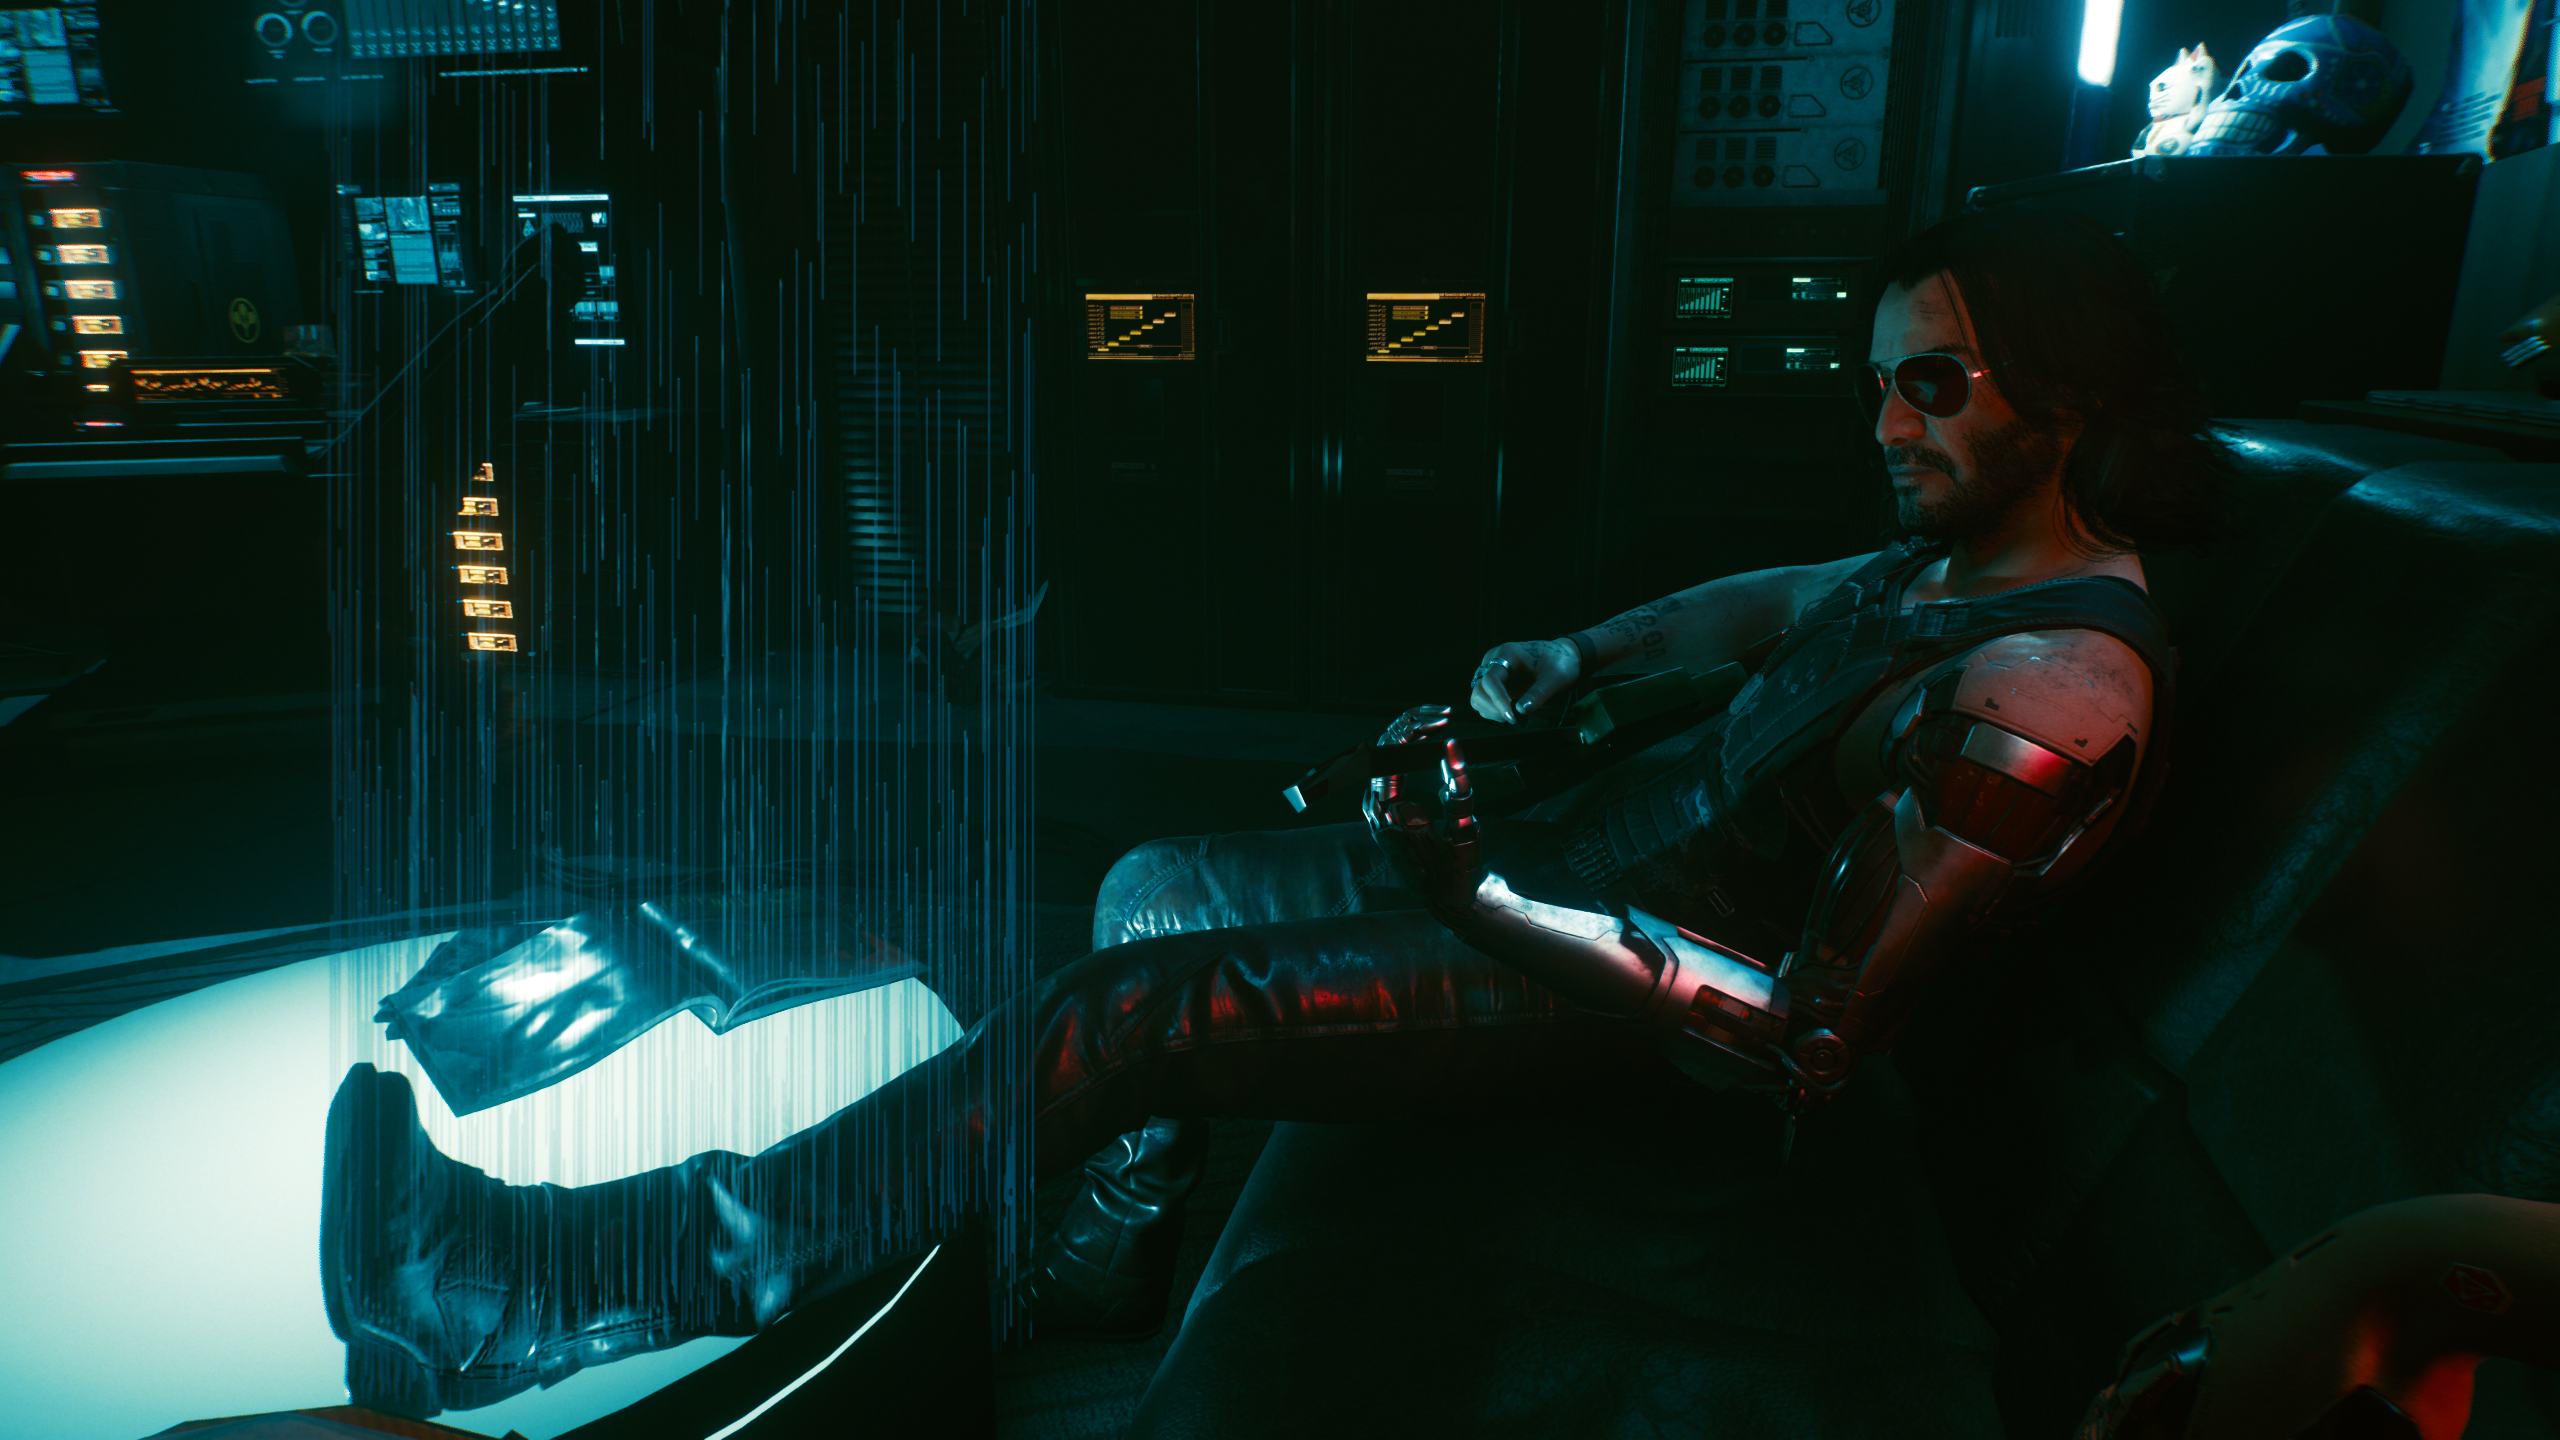 General 2560x1440 Cyberpunk 2077 Johnny Silverhand video games screen shot CD Projekt RED video game characters Keanu Reeves actor